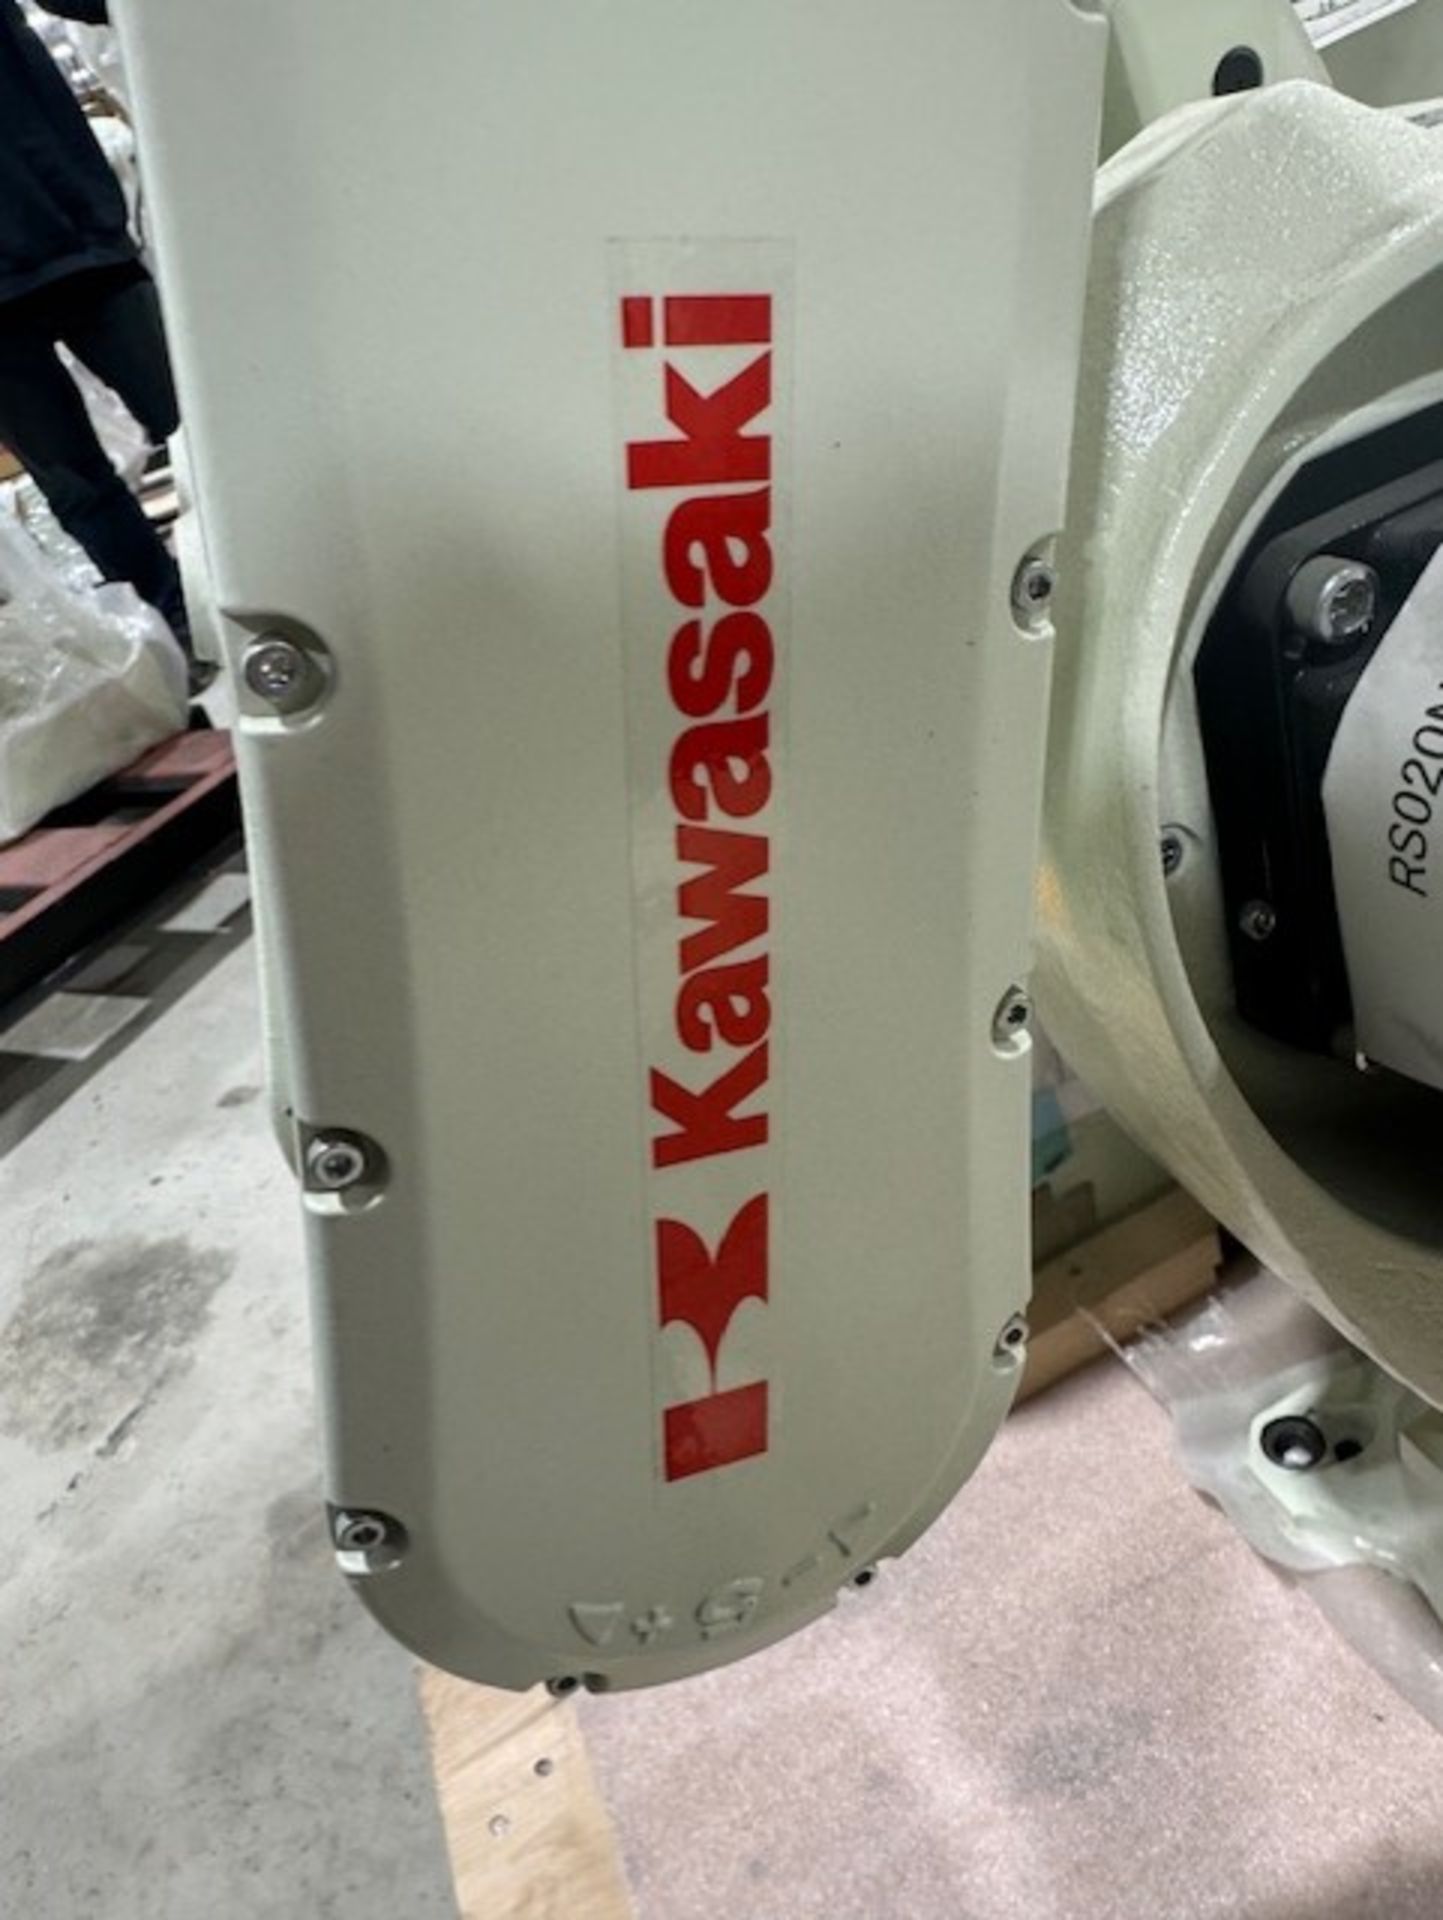 NEW KAWASAKI ROBOT MODEL RS020N, SN 4716, 20KG X 1725MM REACH WITH EO1 CONTROLS, CABLES & TEACH - Image 5 of 7